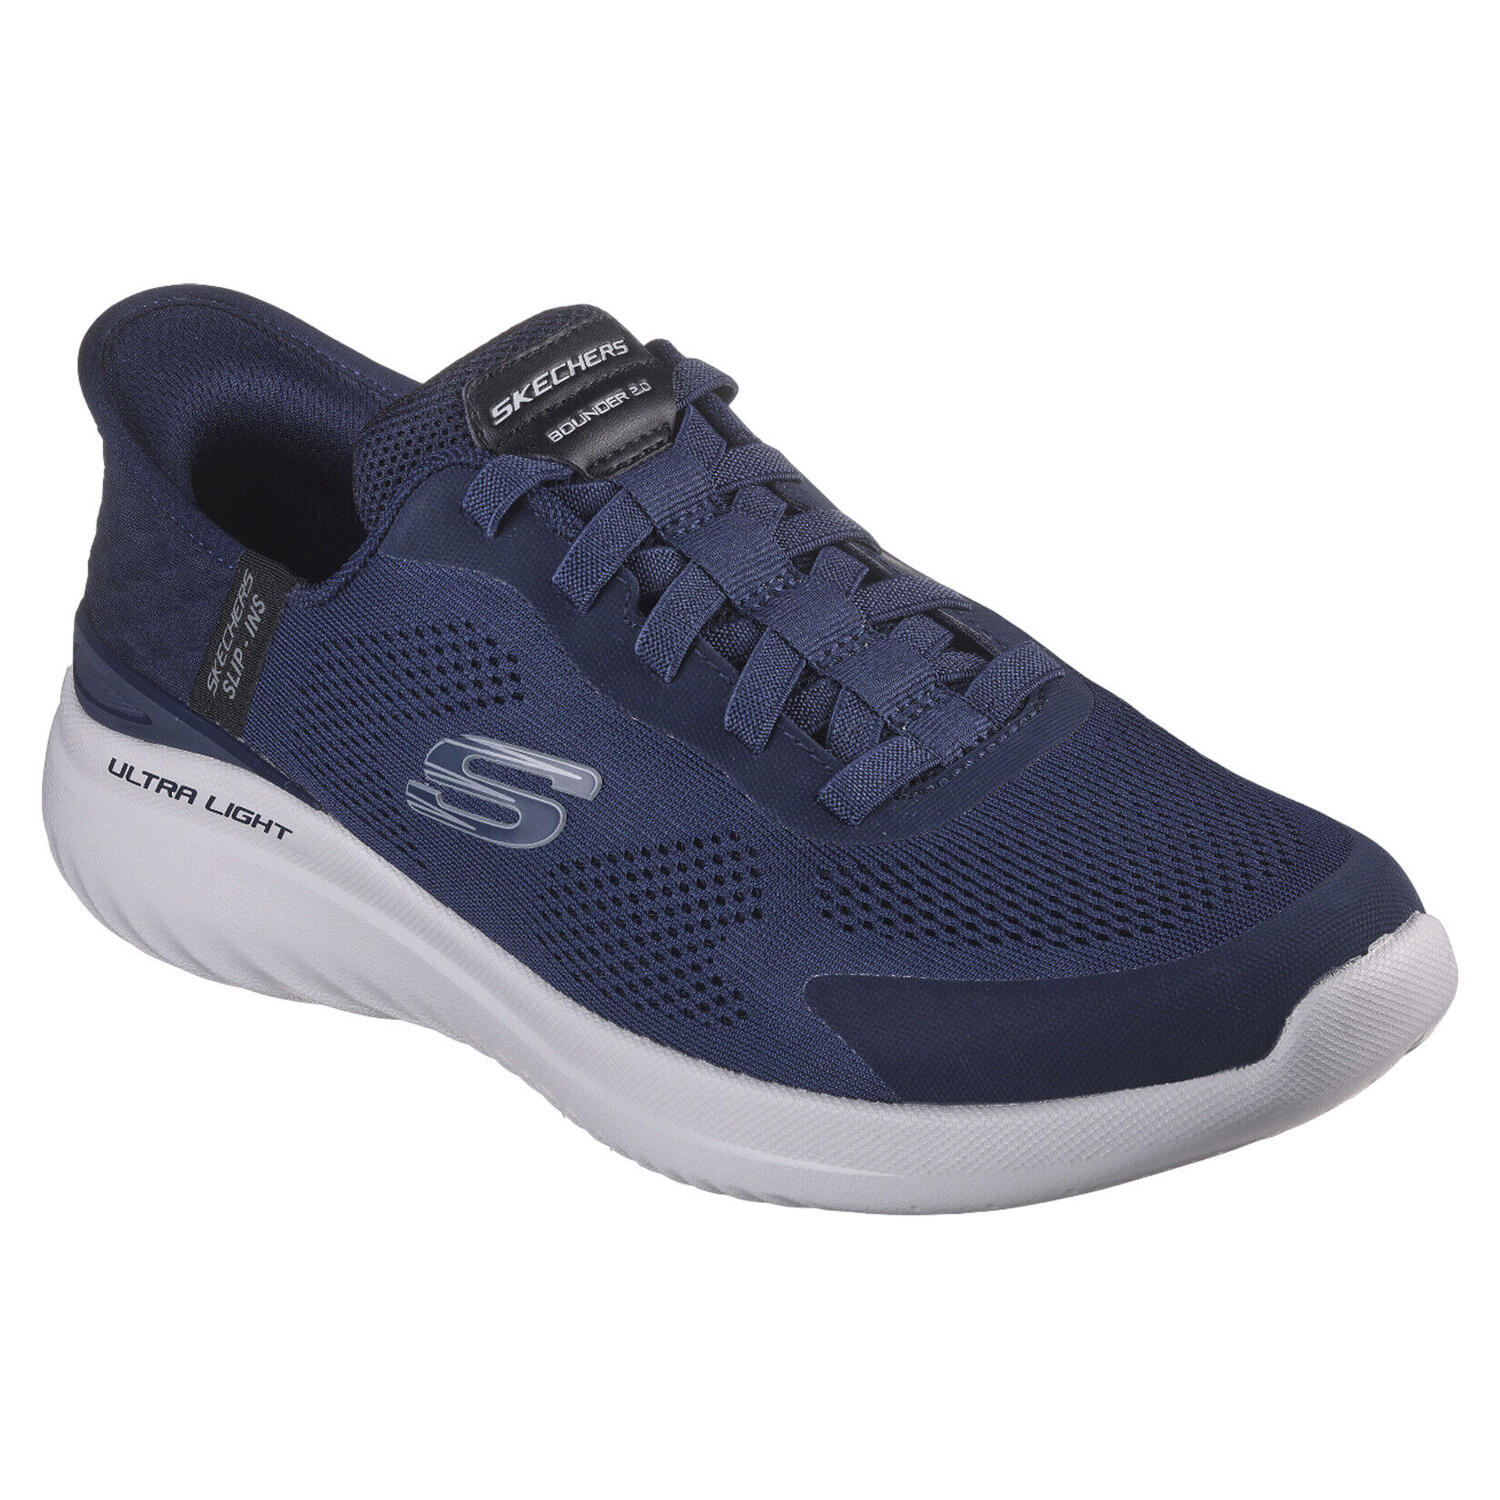 SKECHERS Mens Bounder 2.0 Emerged Trainers (Navy)